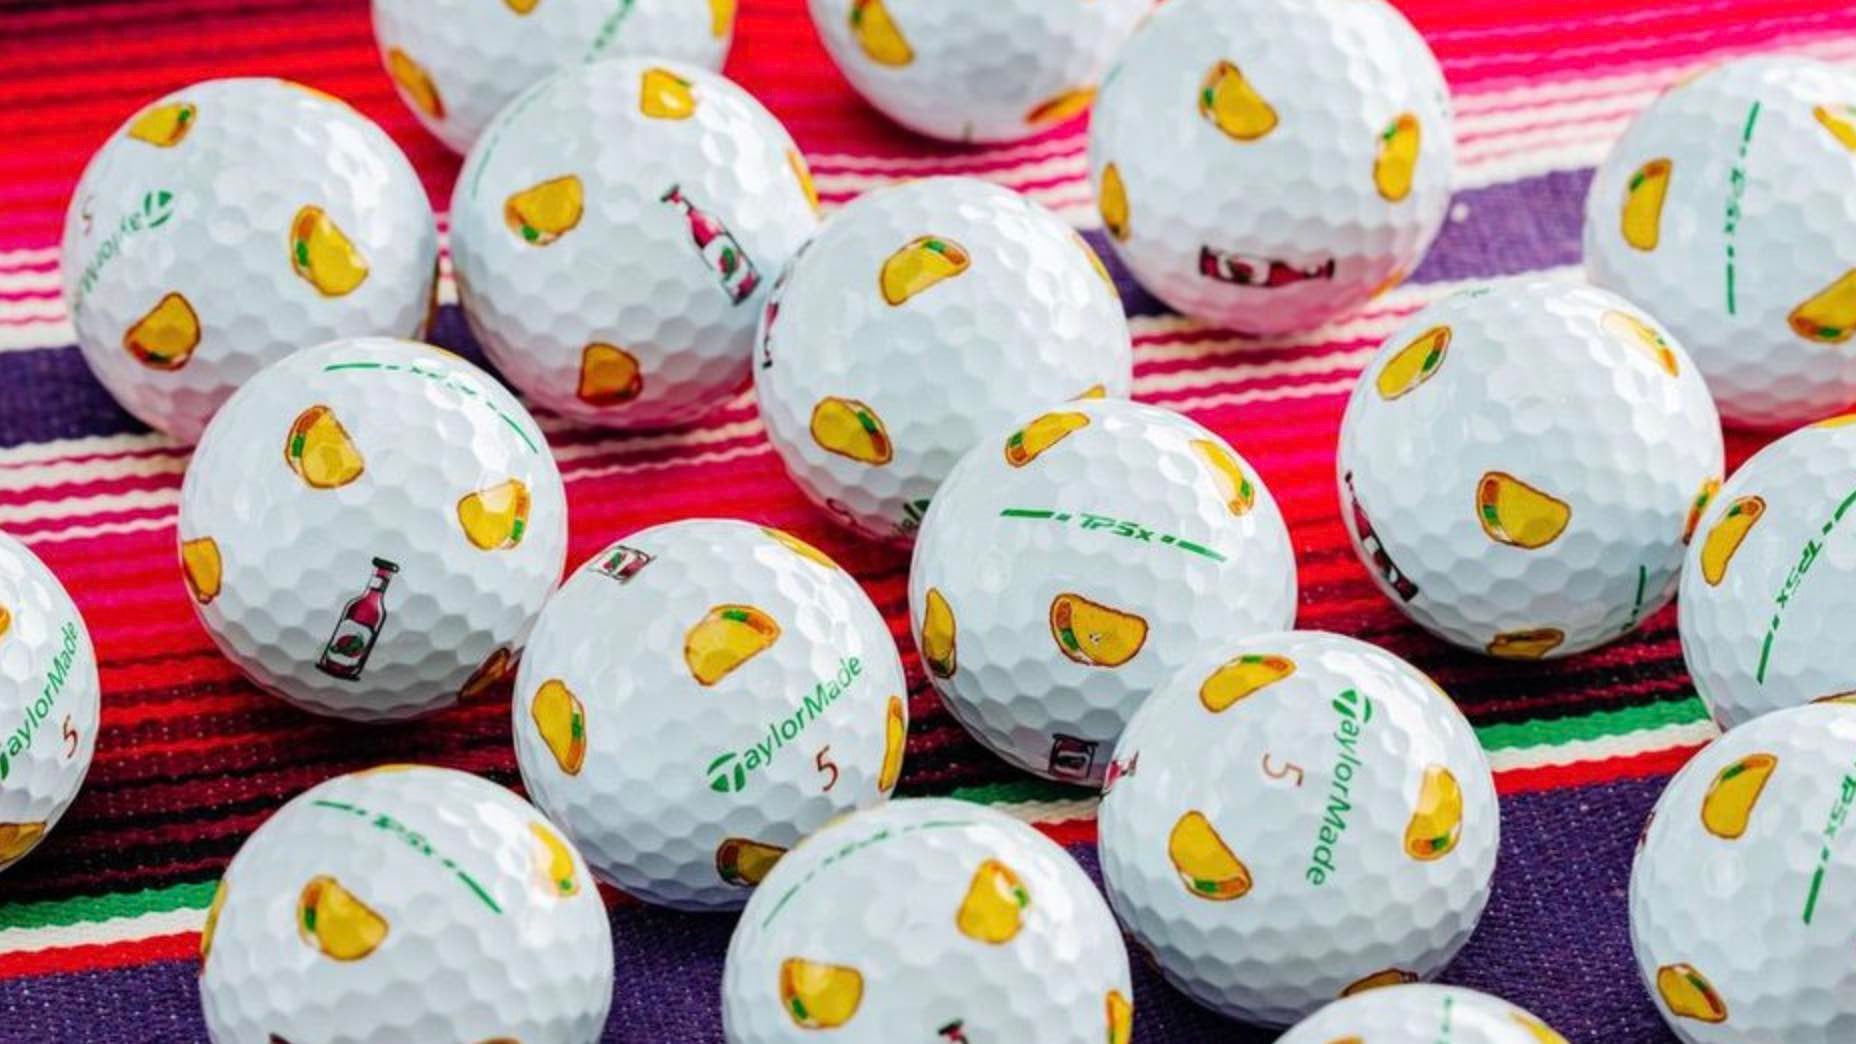 A group of limited-edition TaylorMade taco golf balls